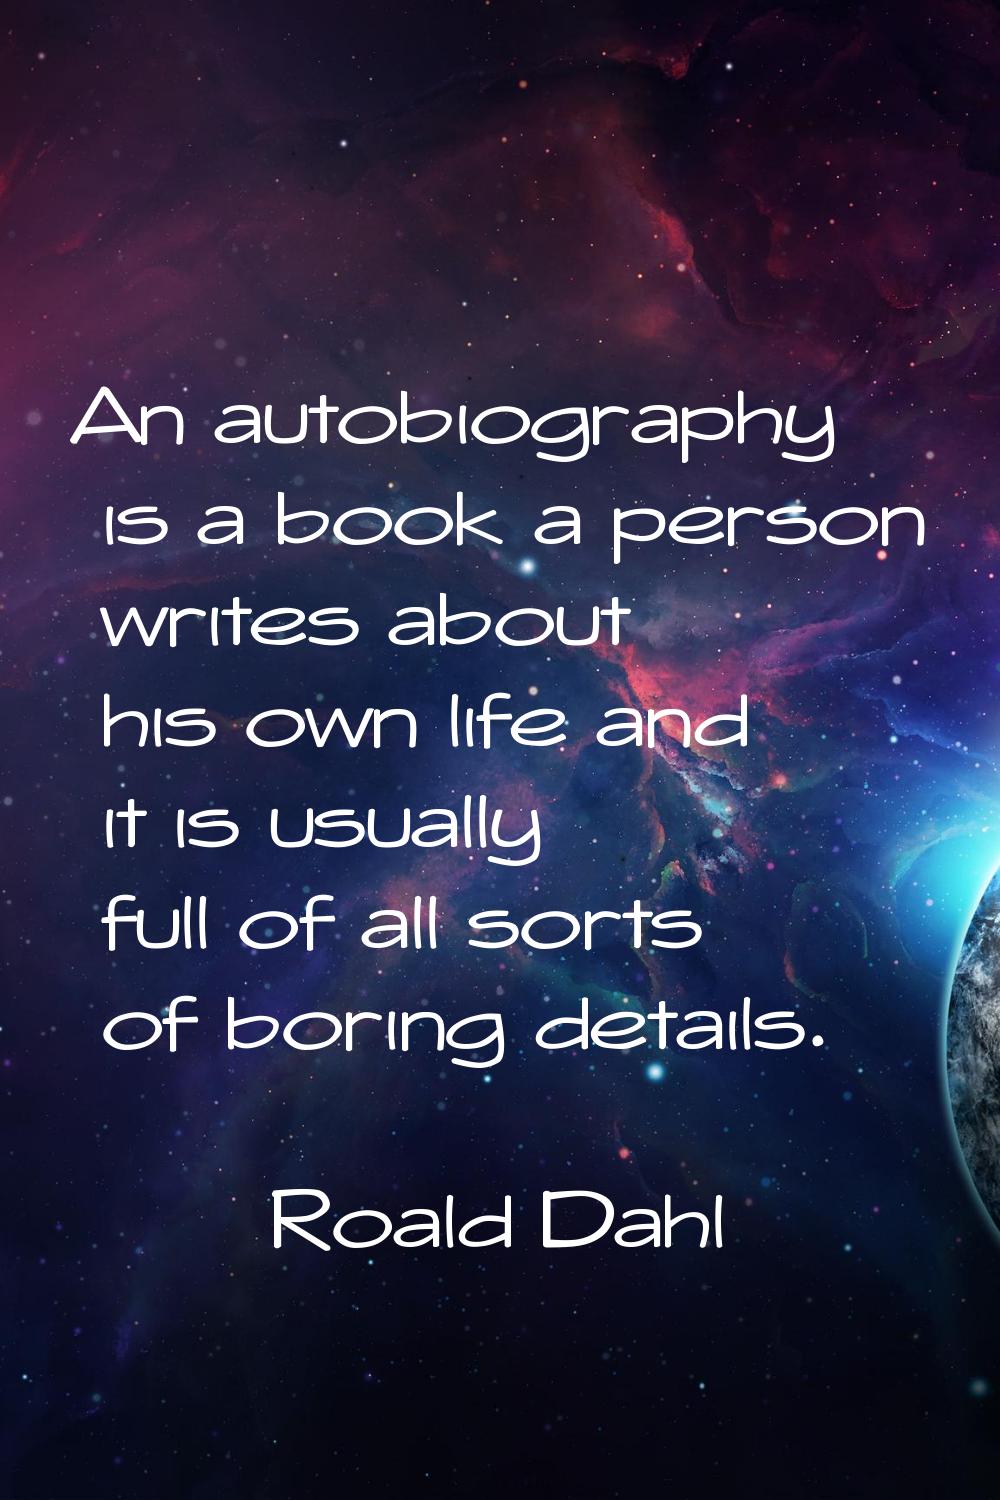 An autobiography is a book a person writes about his own life and it is usually full of all sorts o